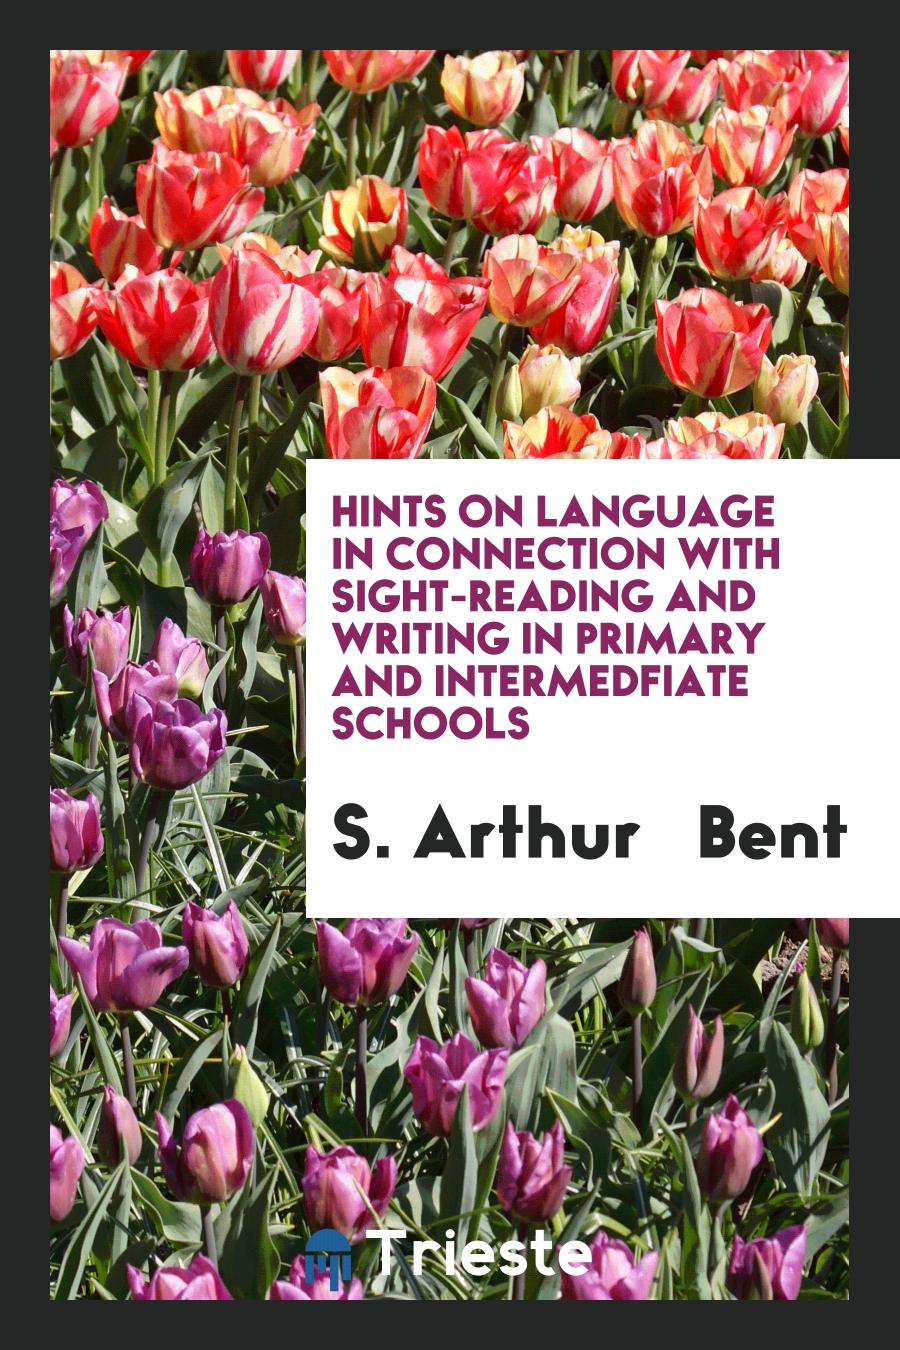 Hints on Language in Connection with Sight-reading and Writing in Primary and Intermedfiate Schools